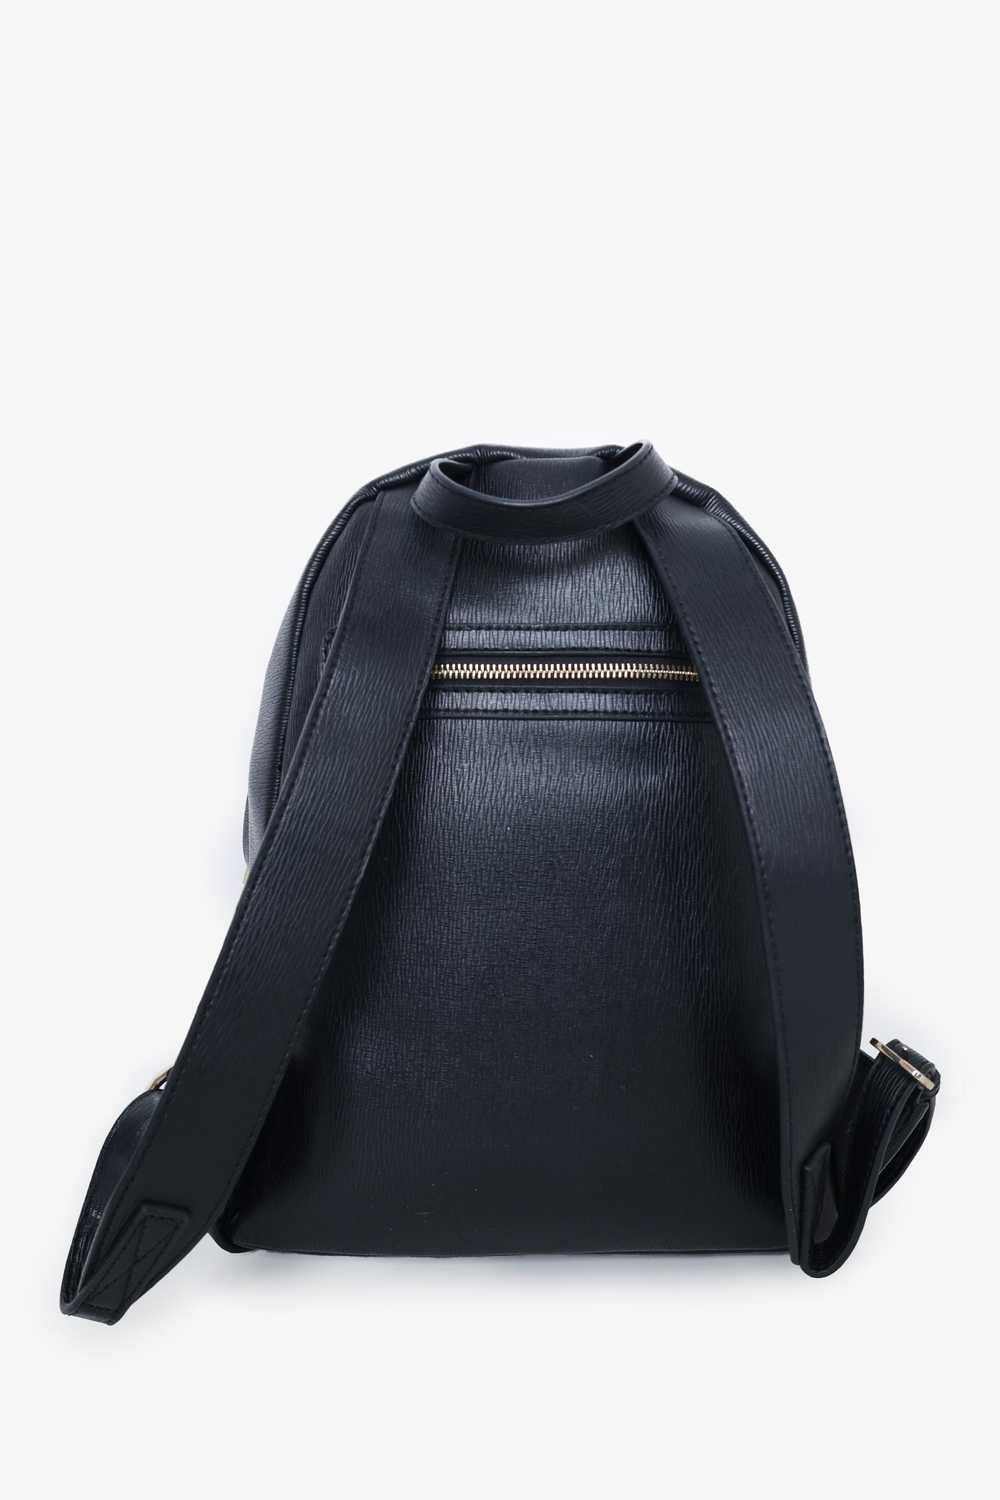 Love Moschino Black Leather Red Heart Backpack - image 2